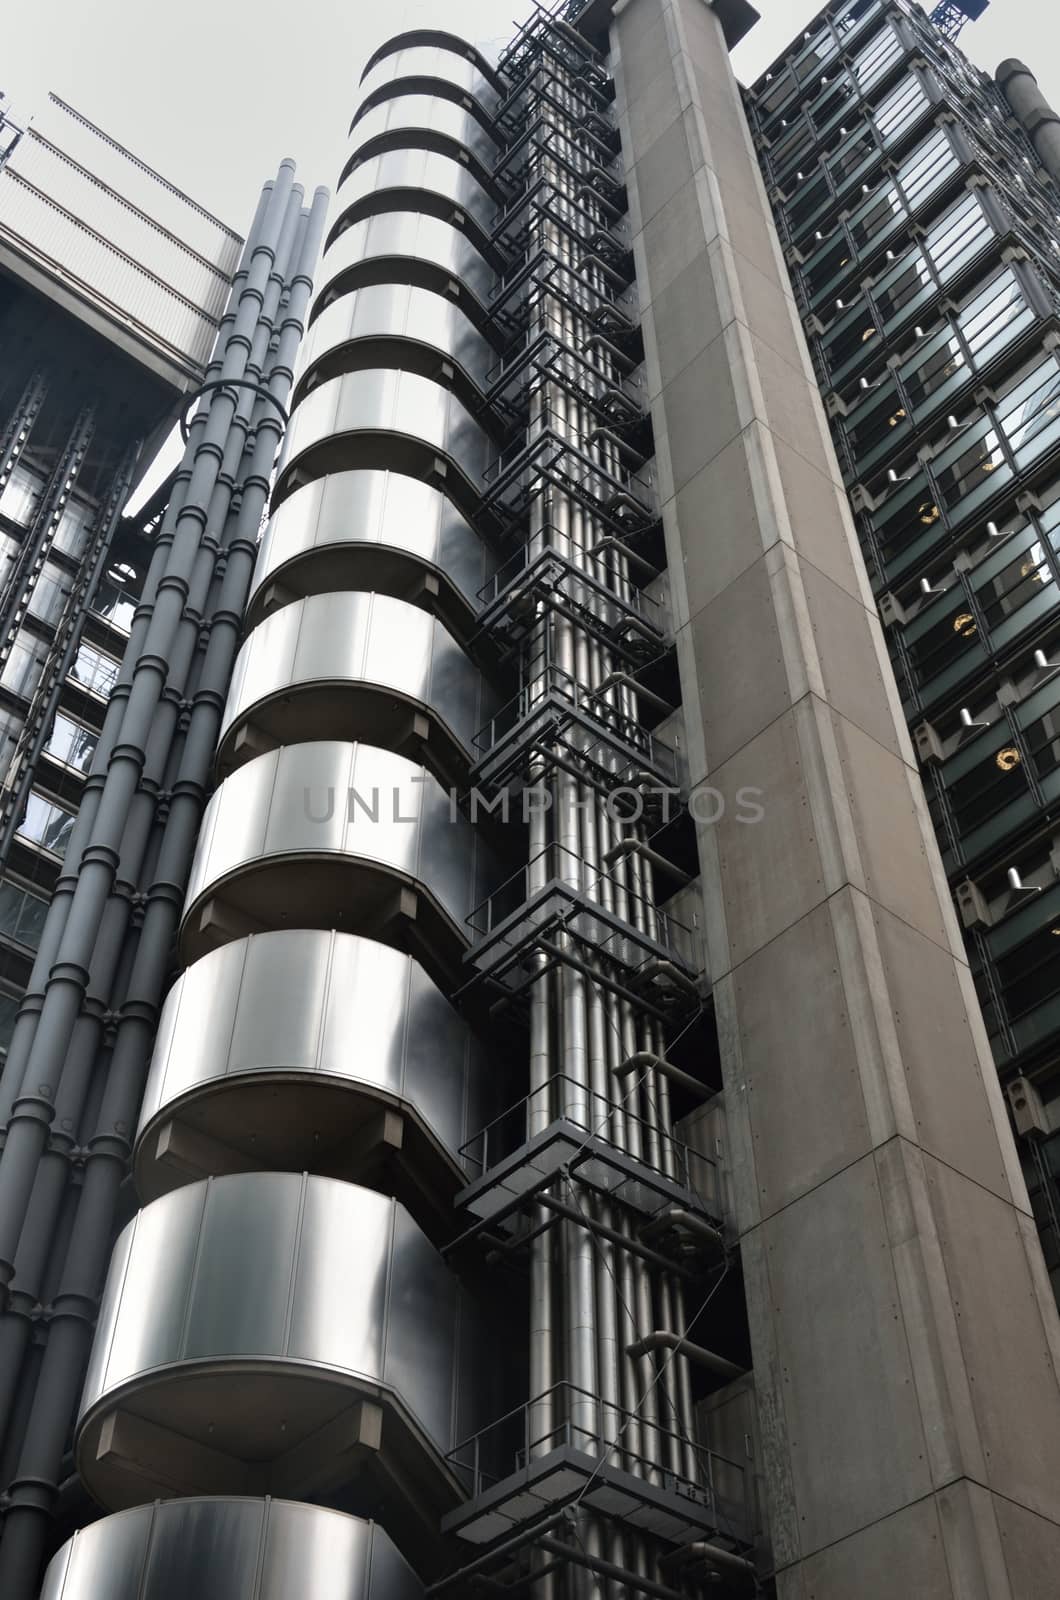 Lloyds tower by pauws99